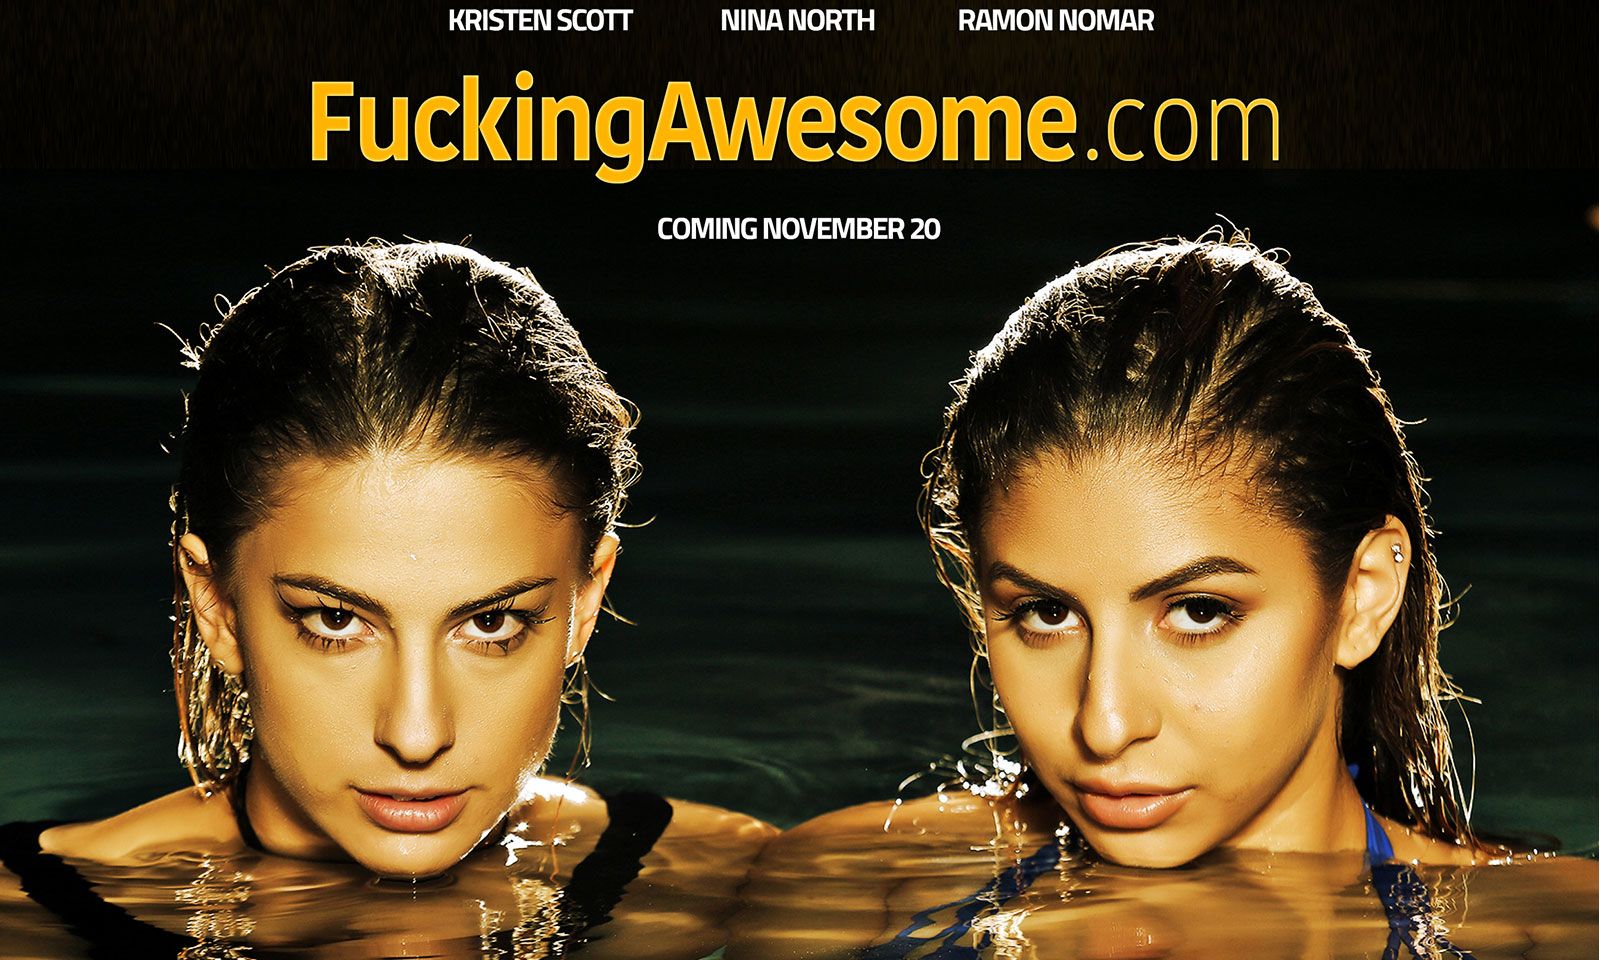 FuckingAwesome.com Makes 'Wild Things' A Lot More Wild